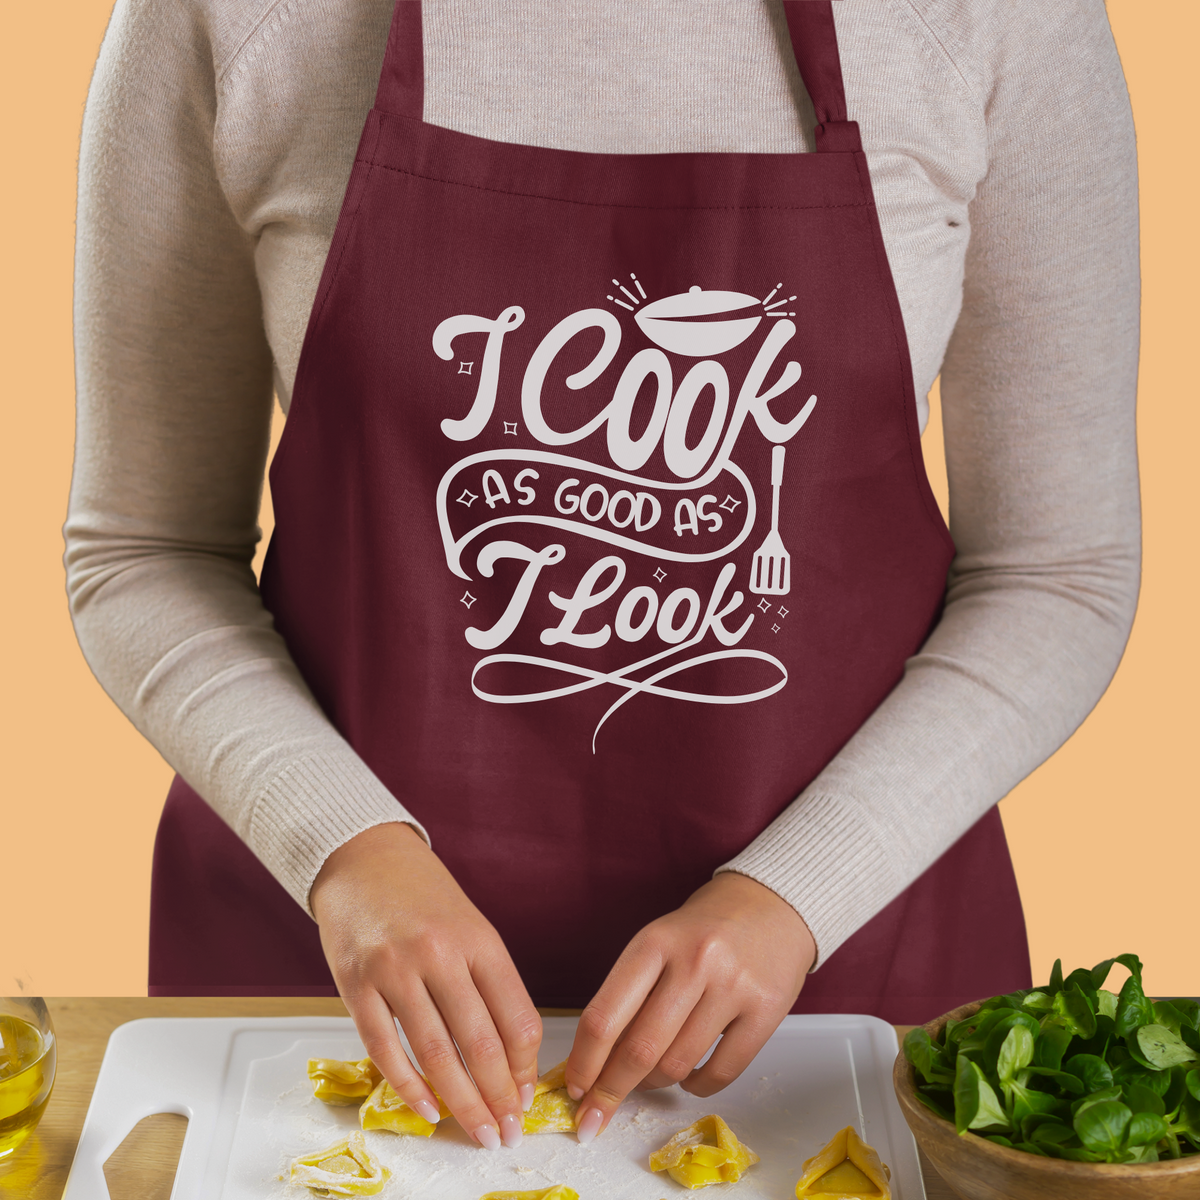 I-Cook-As-Good-A- I-Look-Personalised-Cotton-Apron-Gogirgit-Maroon